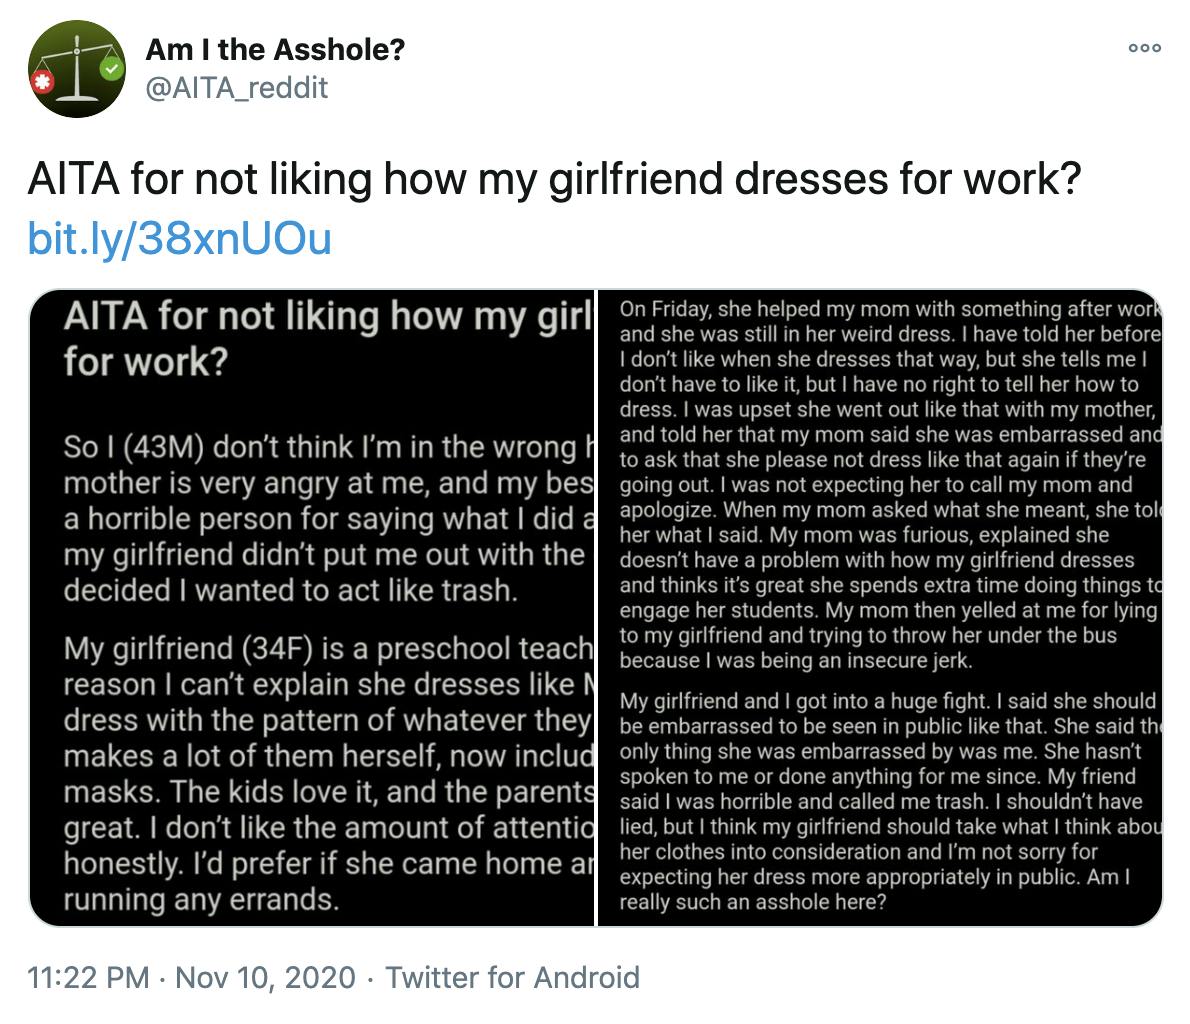 'AITA for not liking how my girlfriend dresses for work? https://bit.ly/38xnUOu' screenshot of the post